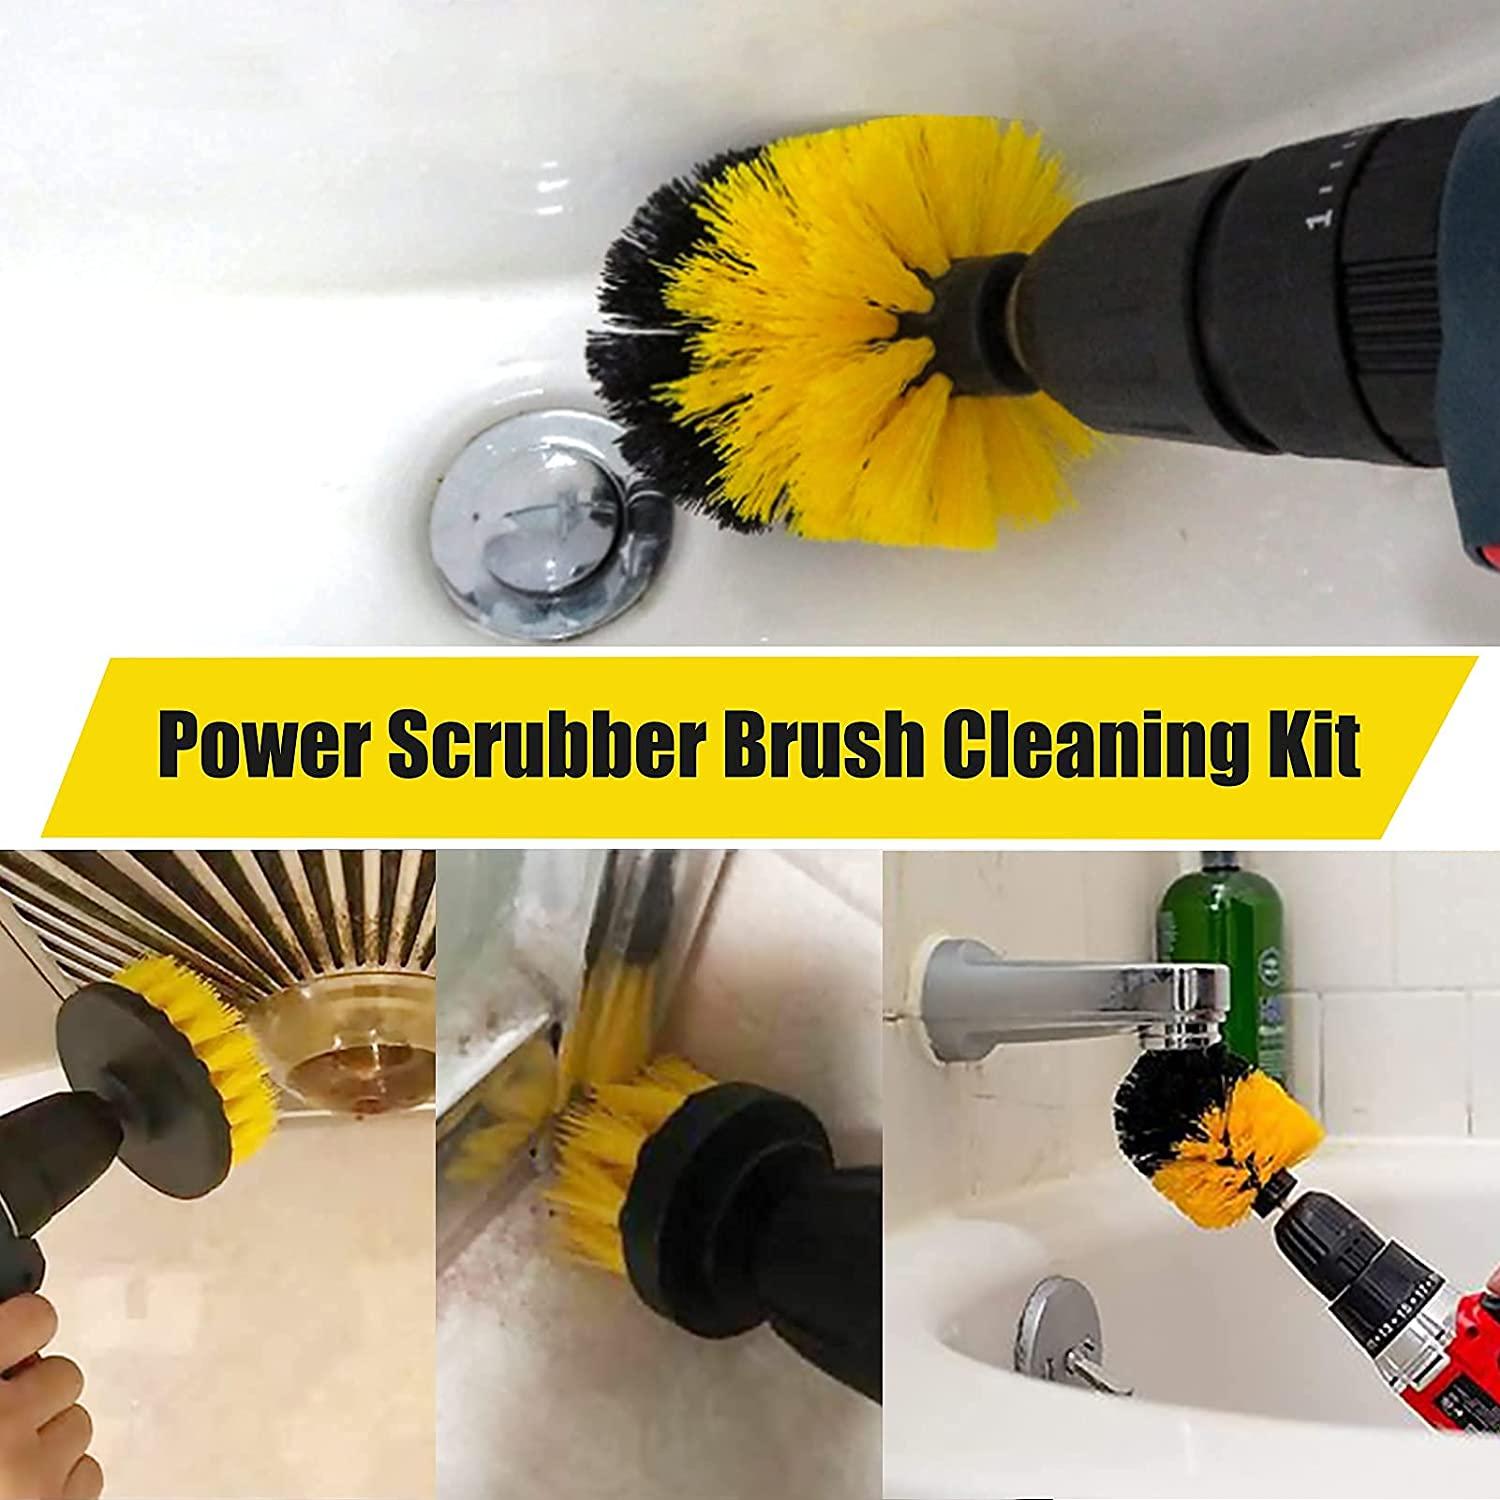 3 Pcs Drill Brush Attachment Set, Power Scrubber Wash Cleaning